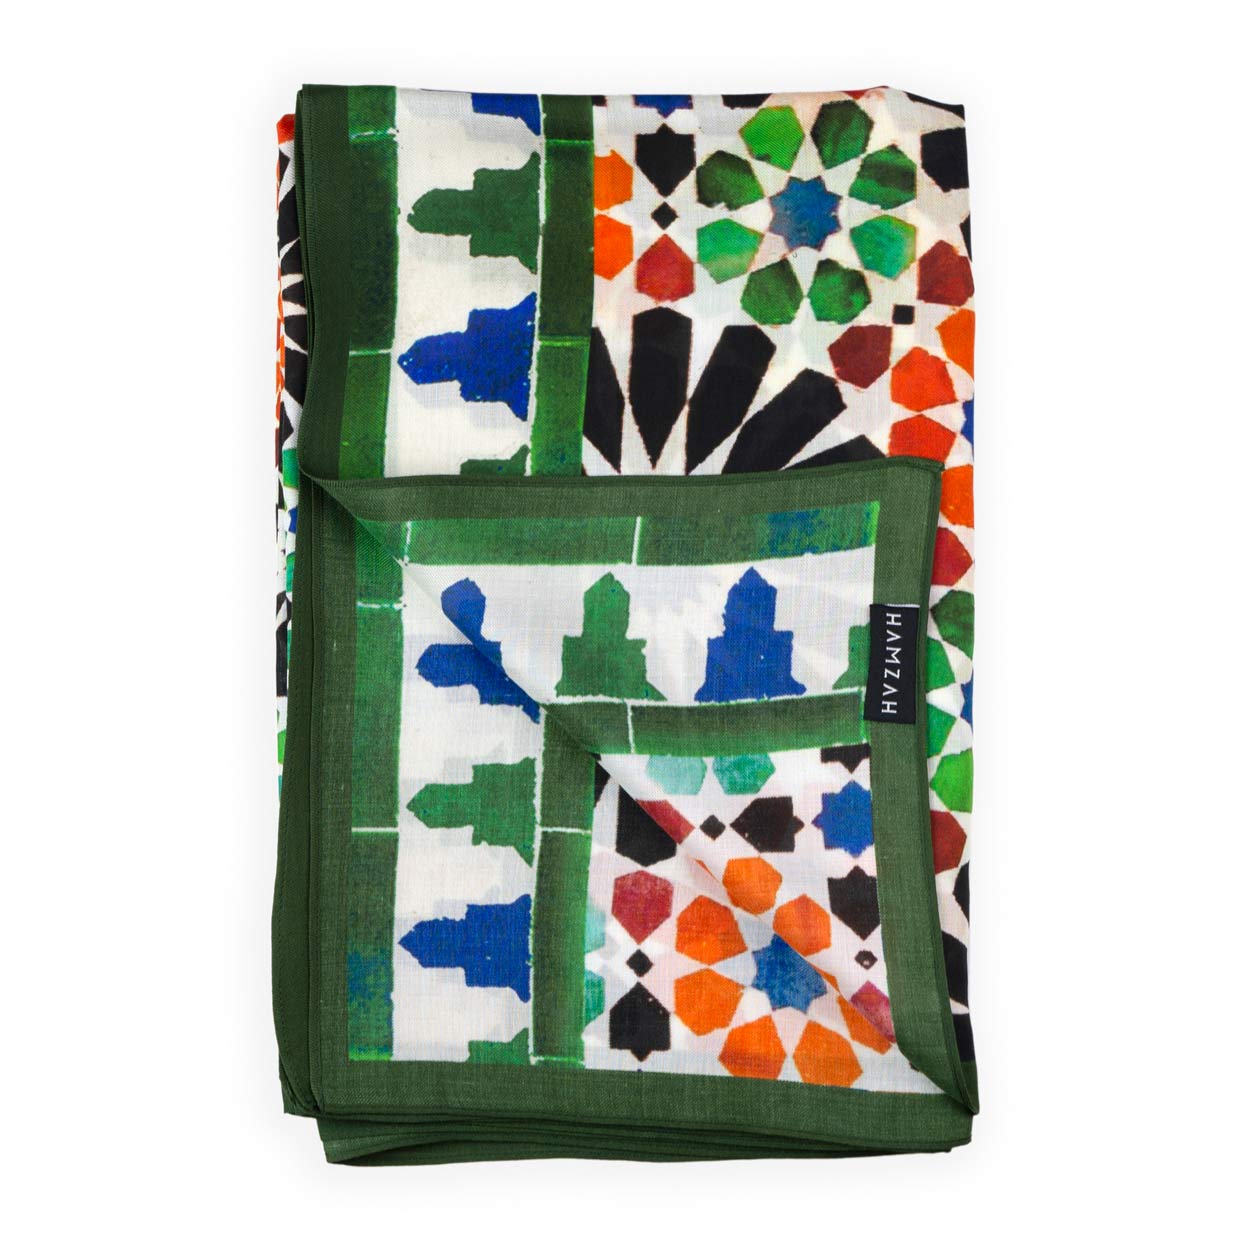 Orange and green scarf inspired by moorish tiles